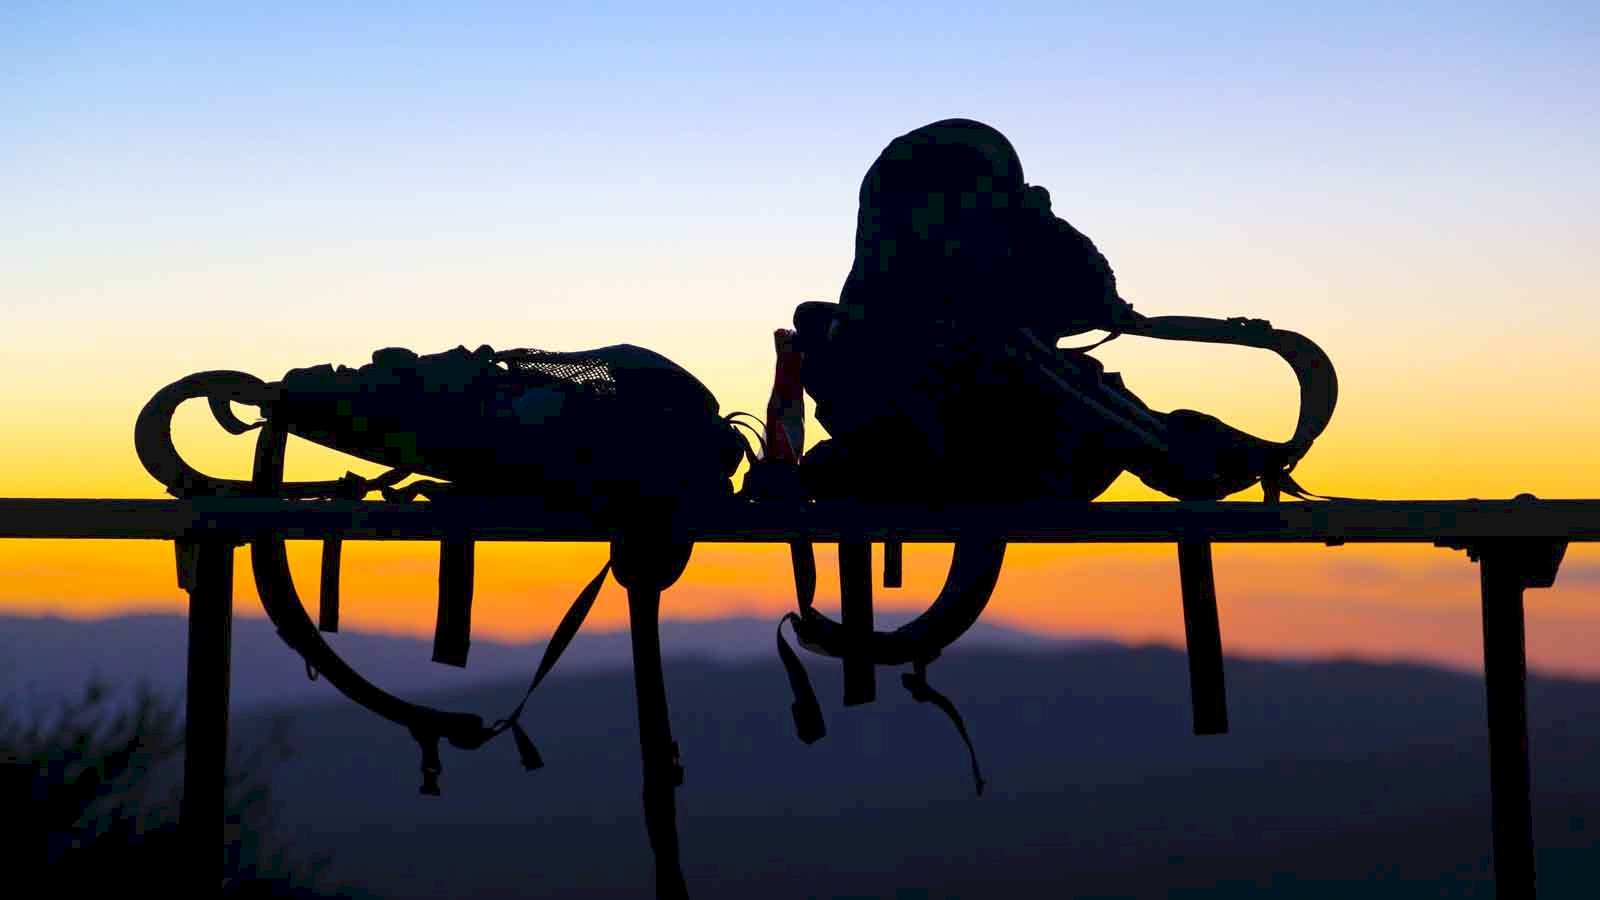 Picture of two backpacks balancing on a railing in the foreground with a orange sunset sky illuminating the hills in the distance.